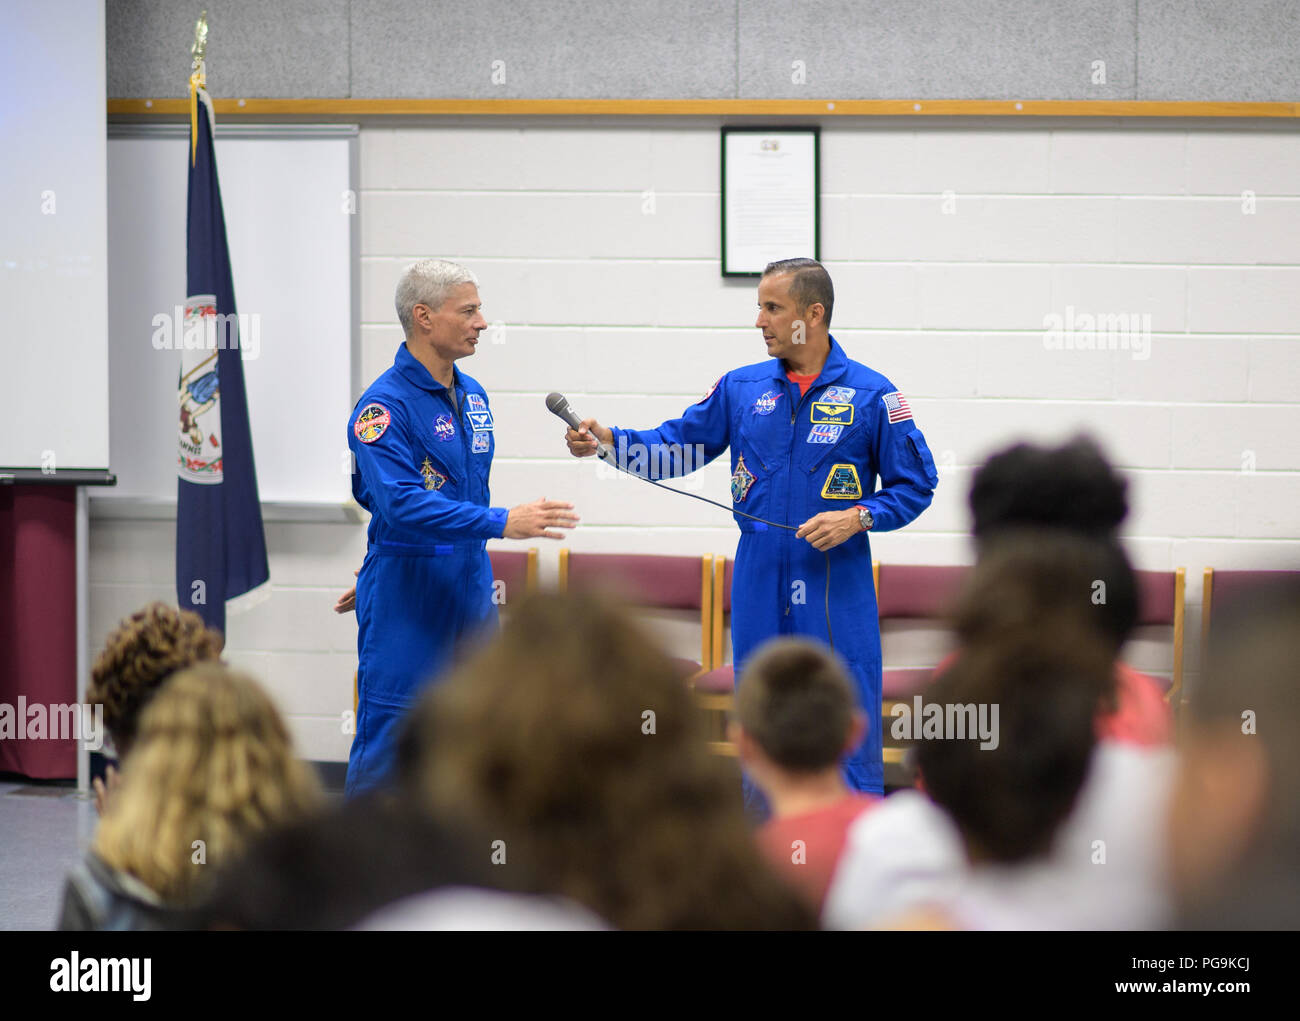 NASA astronauts Mark Vande Hei, left, and Joe Acaba answer questions during a presentation to students at Walt Whitman Middle School, Thursday, June 14, 2018 in Alexandria, Va. Acaba and astronaut Mark Vande Hei answered questions from the audience and spoke about their experiences aboard the International Space Station for 168 days as part of Expedition 53 and 54. Stock Photo